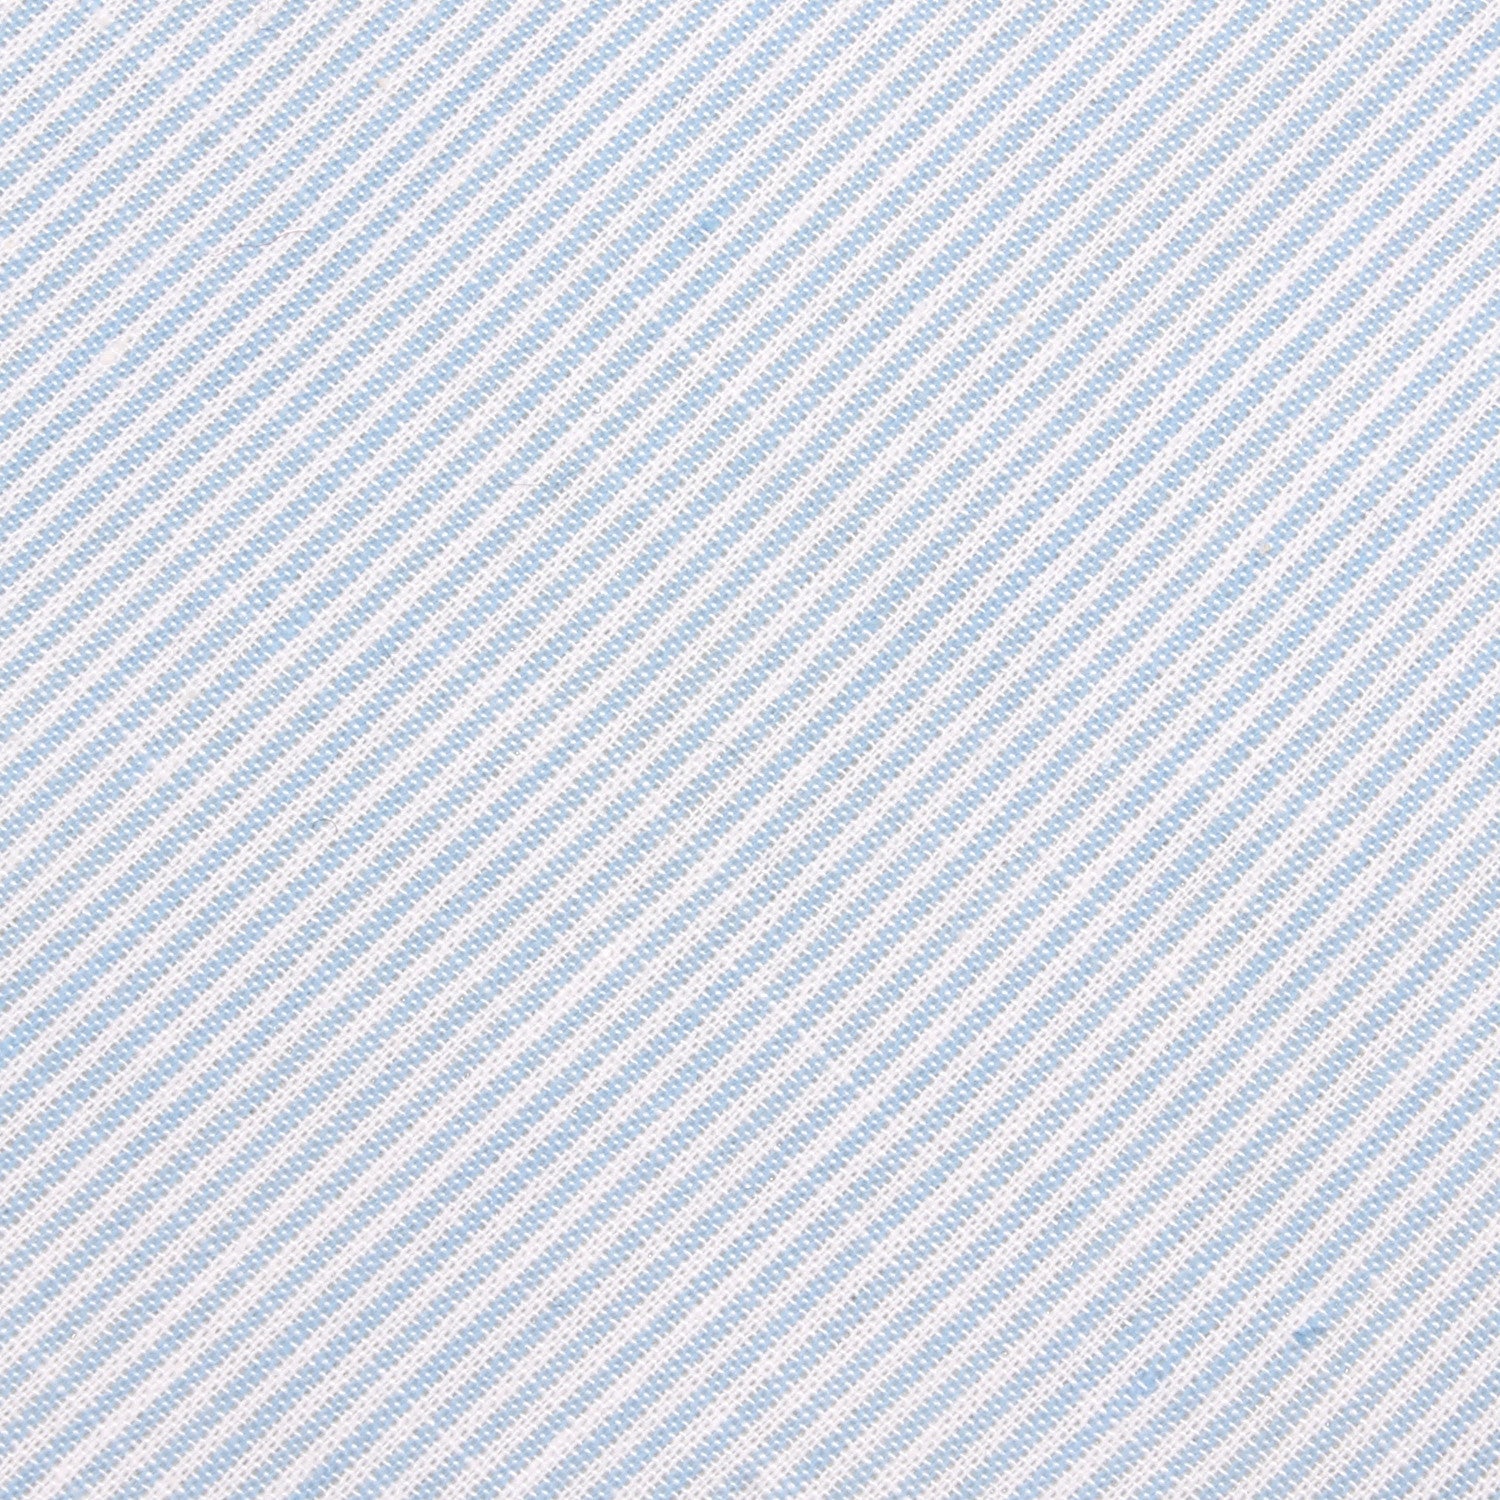 Light Blue and White Pinstripes Cotton Necktie Fabric